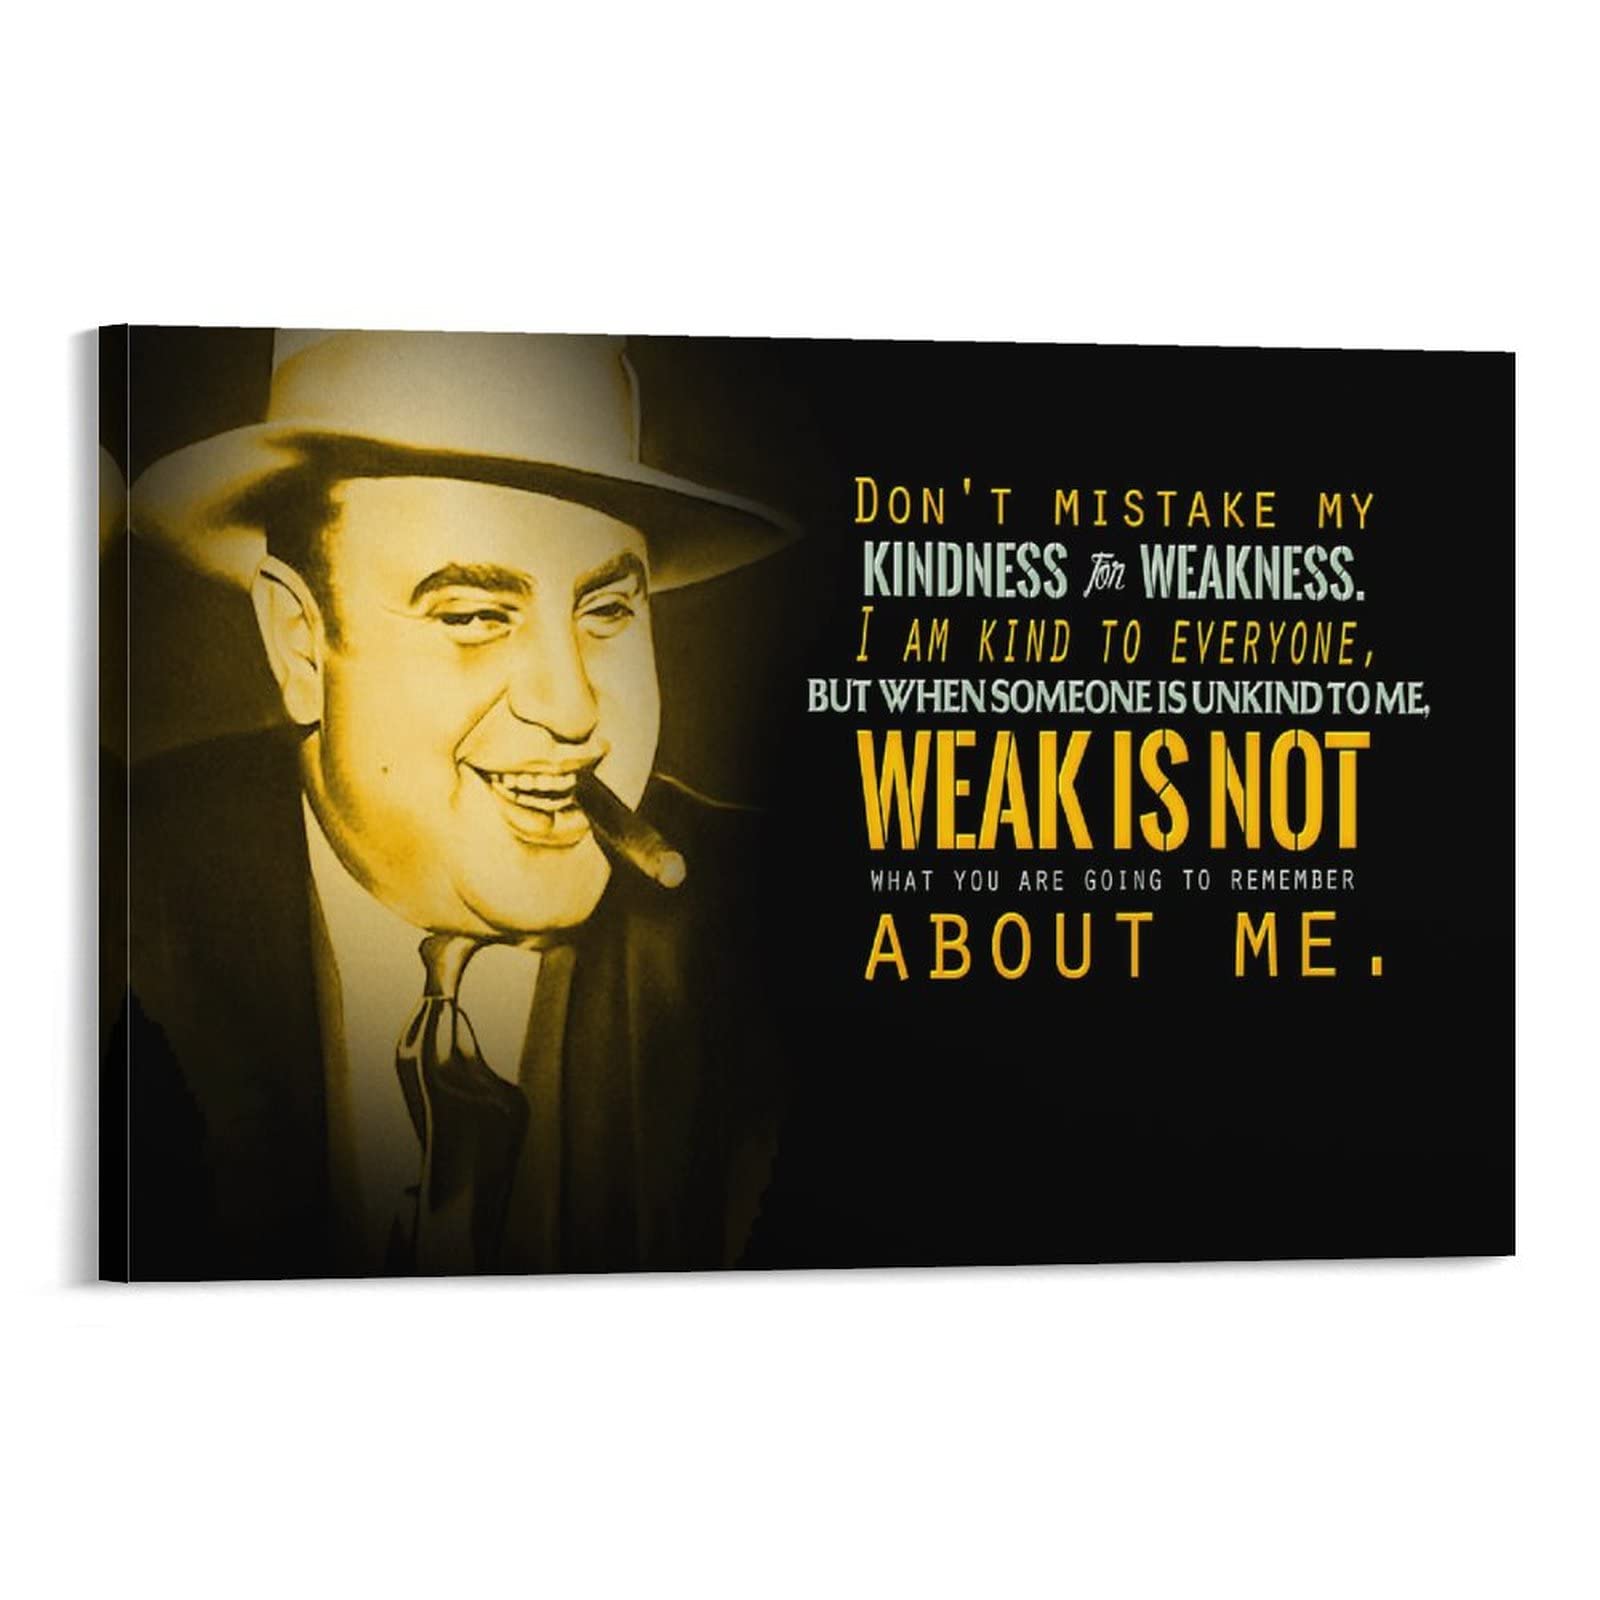 Gangster Quotes Wallpapers